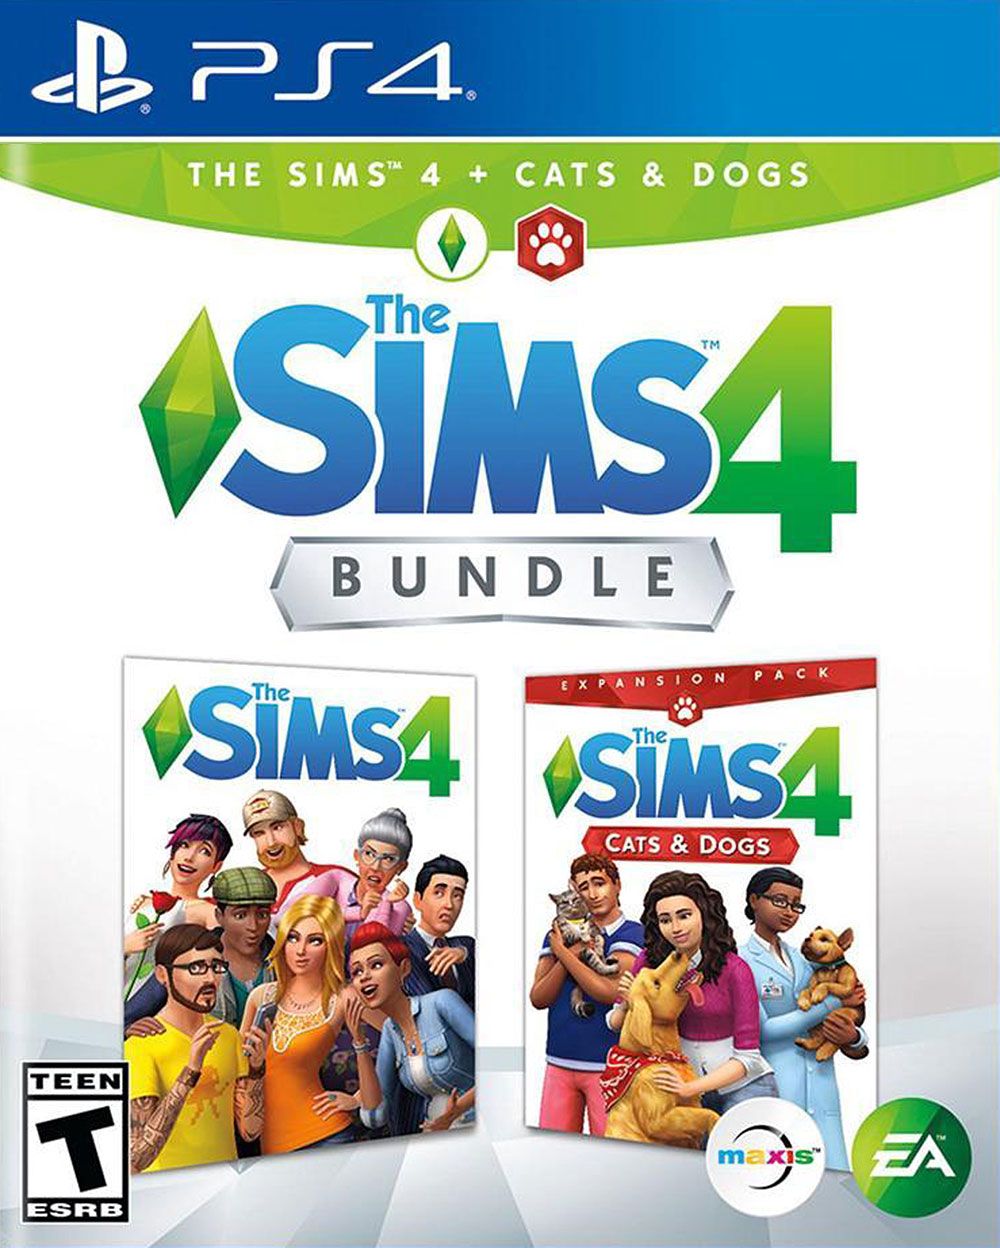 Sims 4, The: Cats & Dogs Expansion Pack Bundle (NTSC/U)(PS4) | PlayStation 4